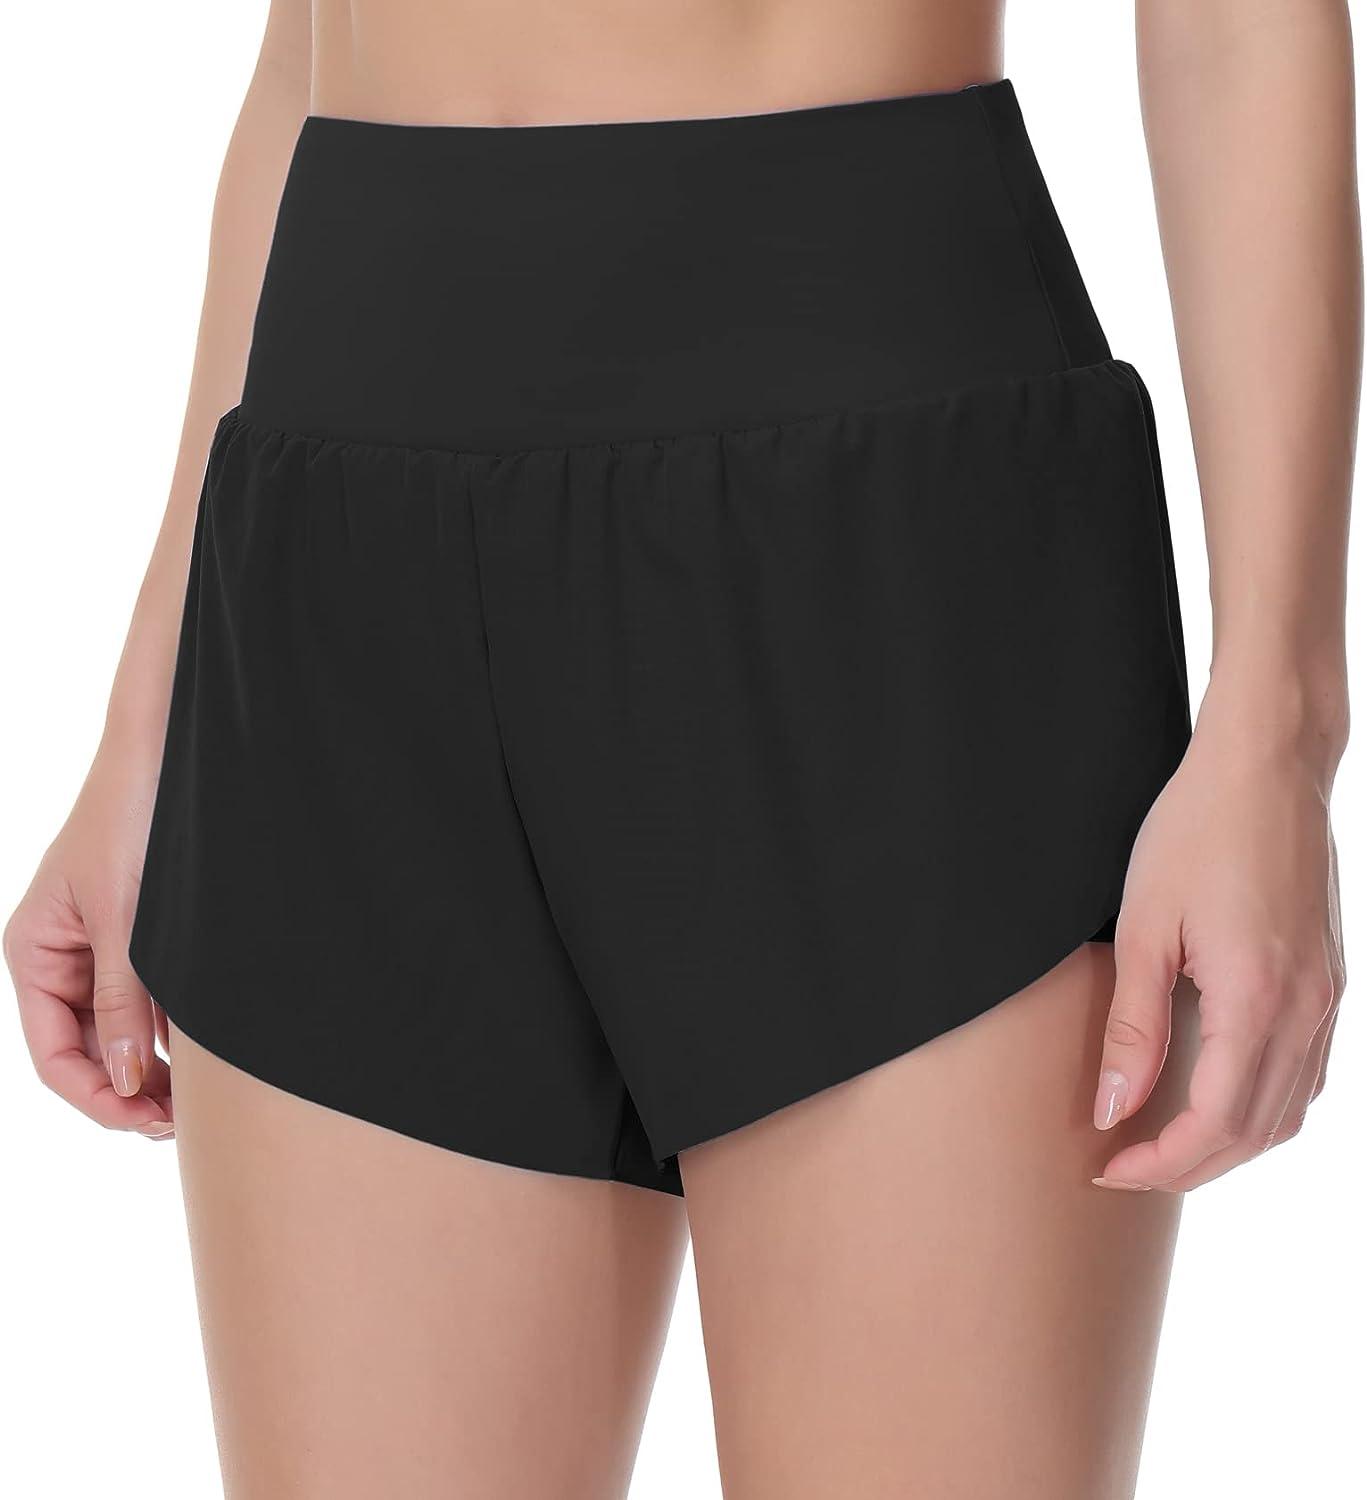 THE GYM PEOPLE Women's Loose Fit Lounge Shorts Drawstring Workout